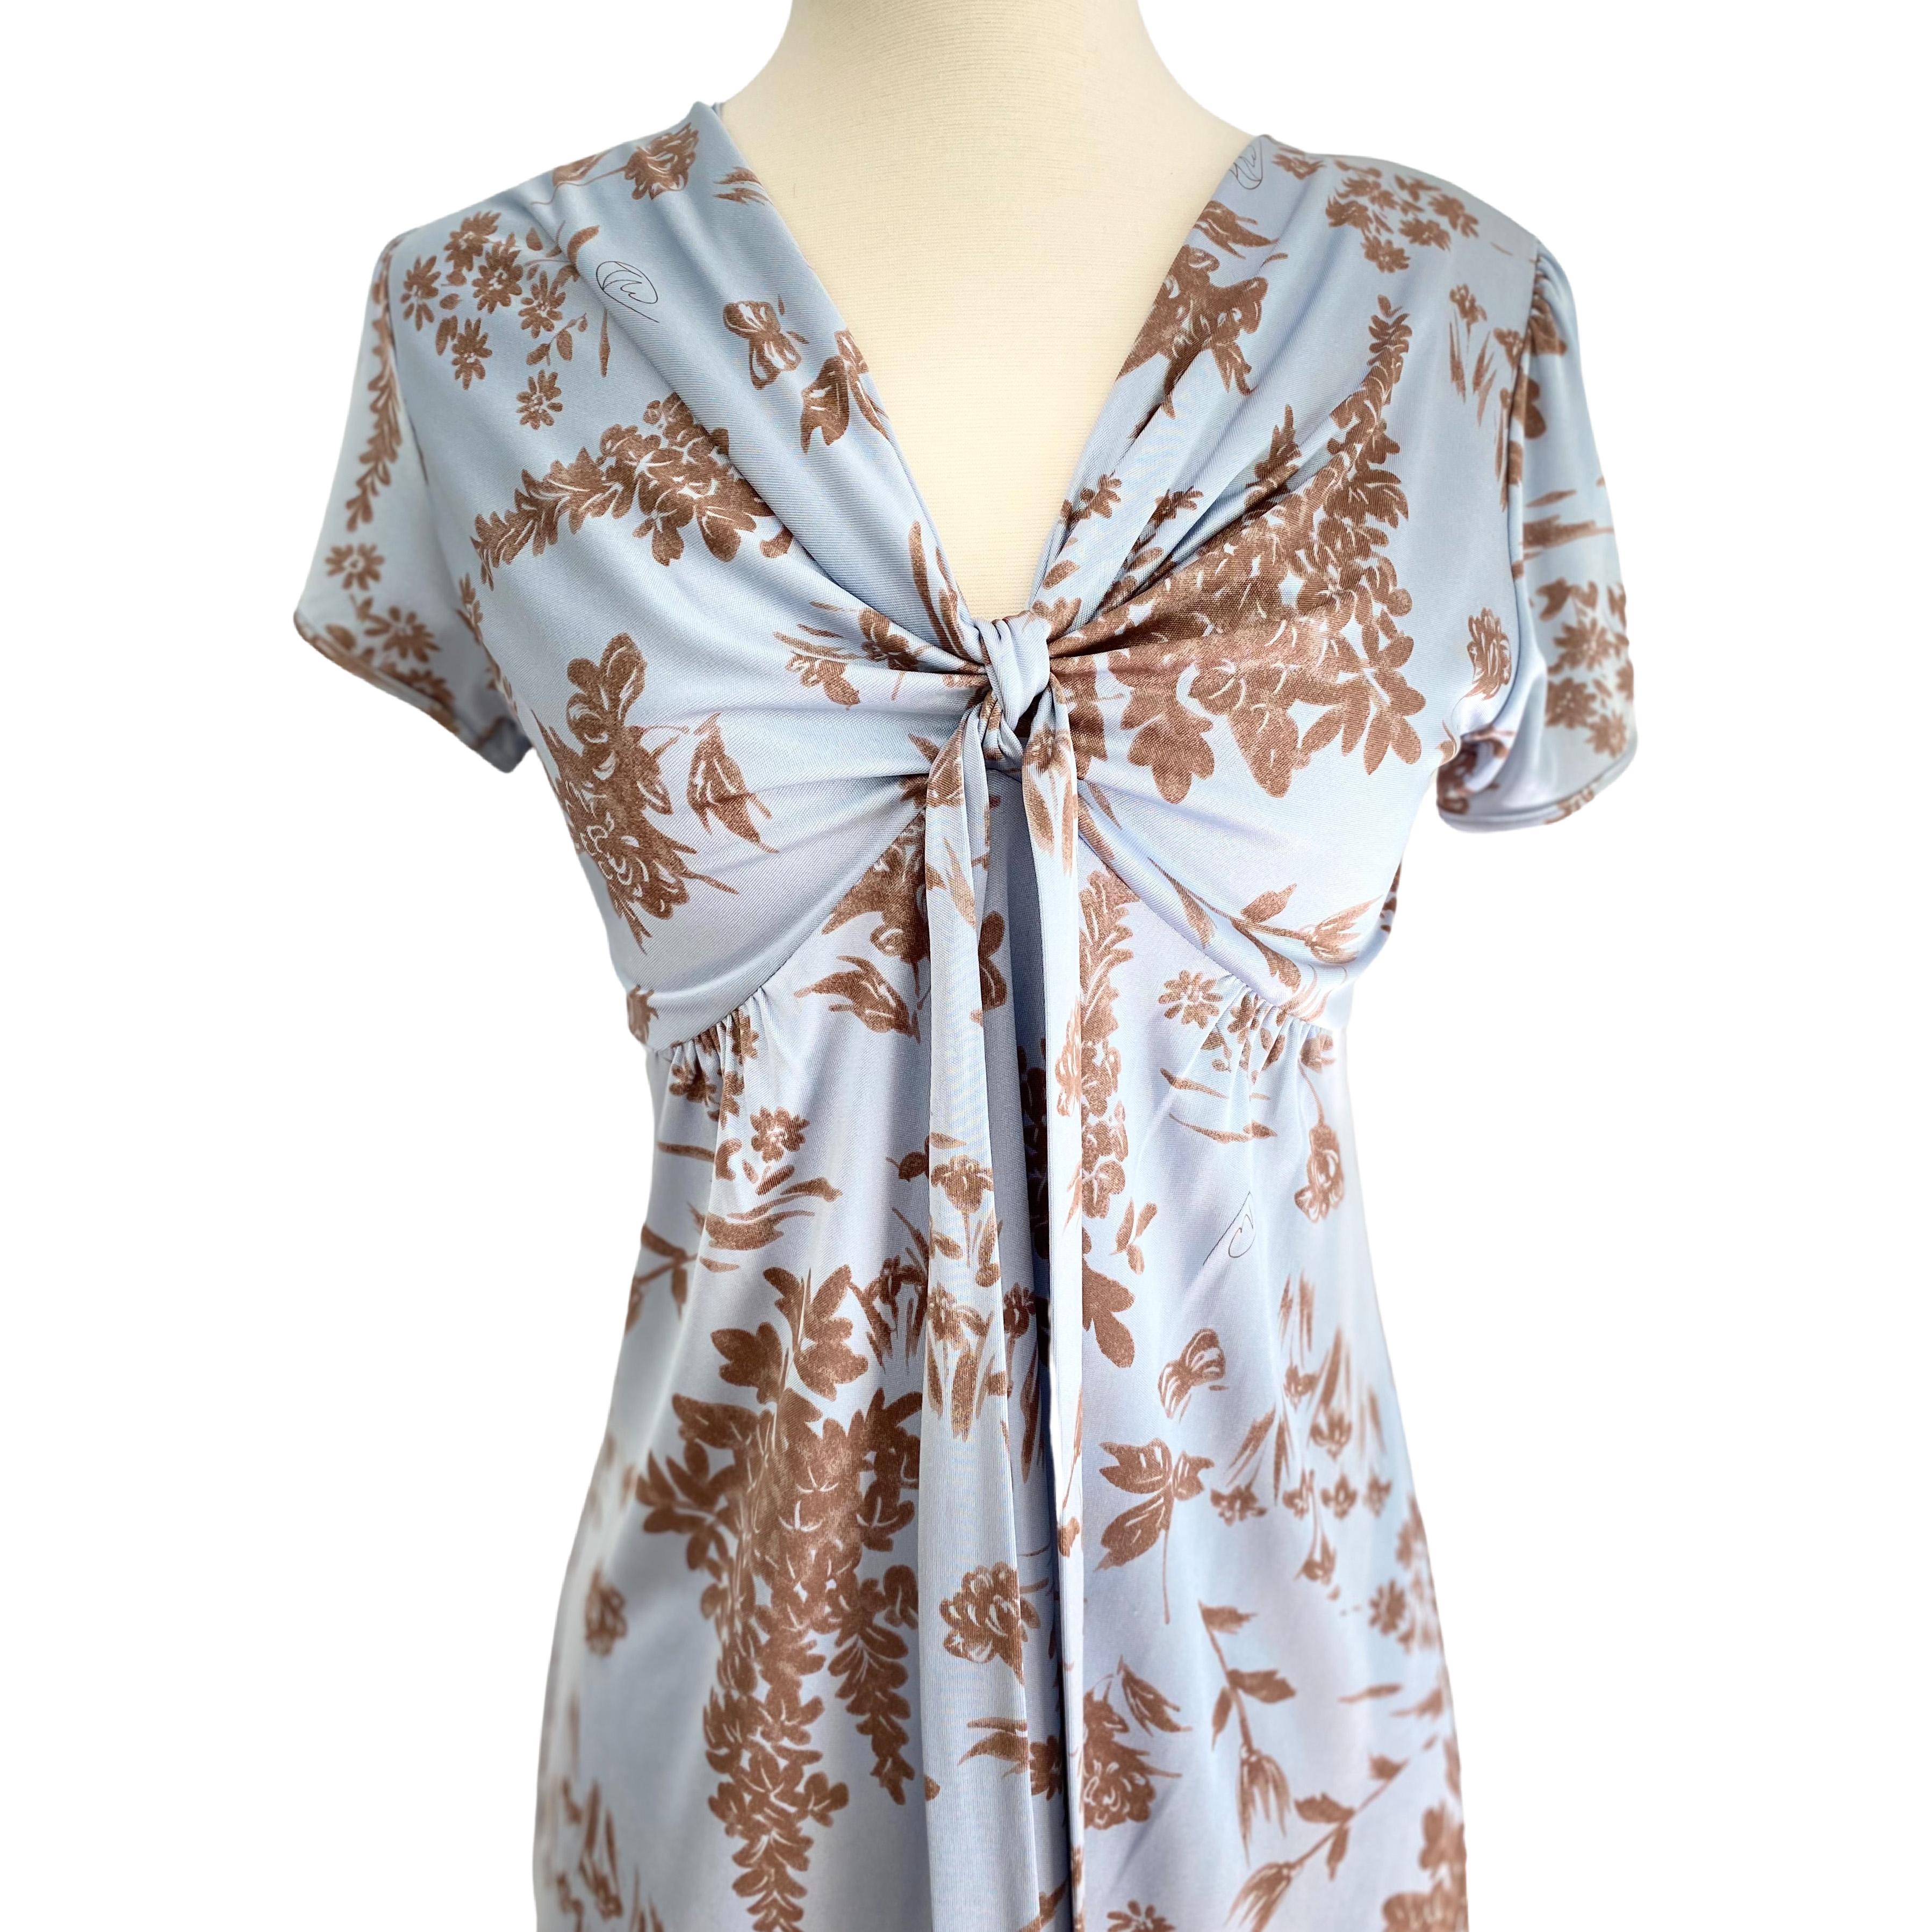 In Flora's original 2-tone wheatberry on pale blue print.
Gentle puff sleeves.
Self-tie at bust for a perfect, flattering fit. 
Approximately 40